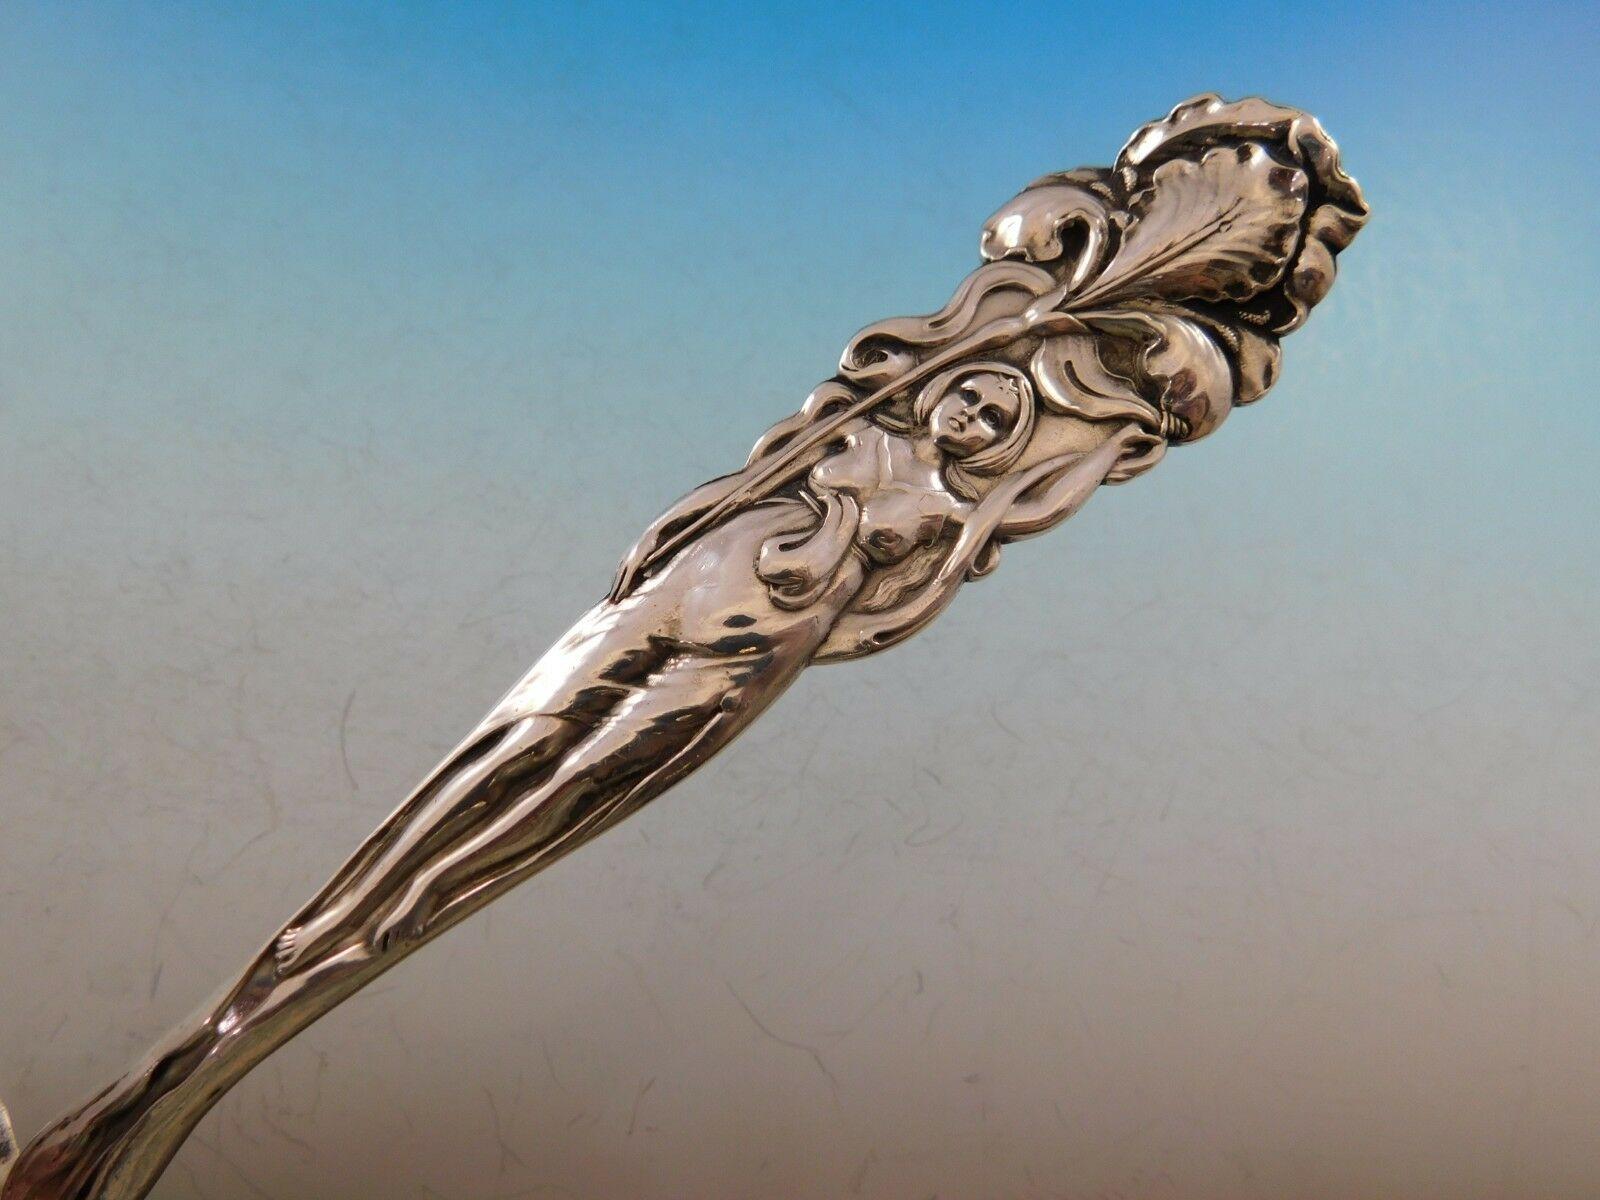 Raphael by Alvin

Captivating sterling silver Berry spoon measuring 9 1/4